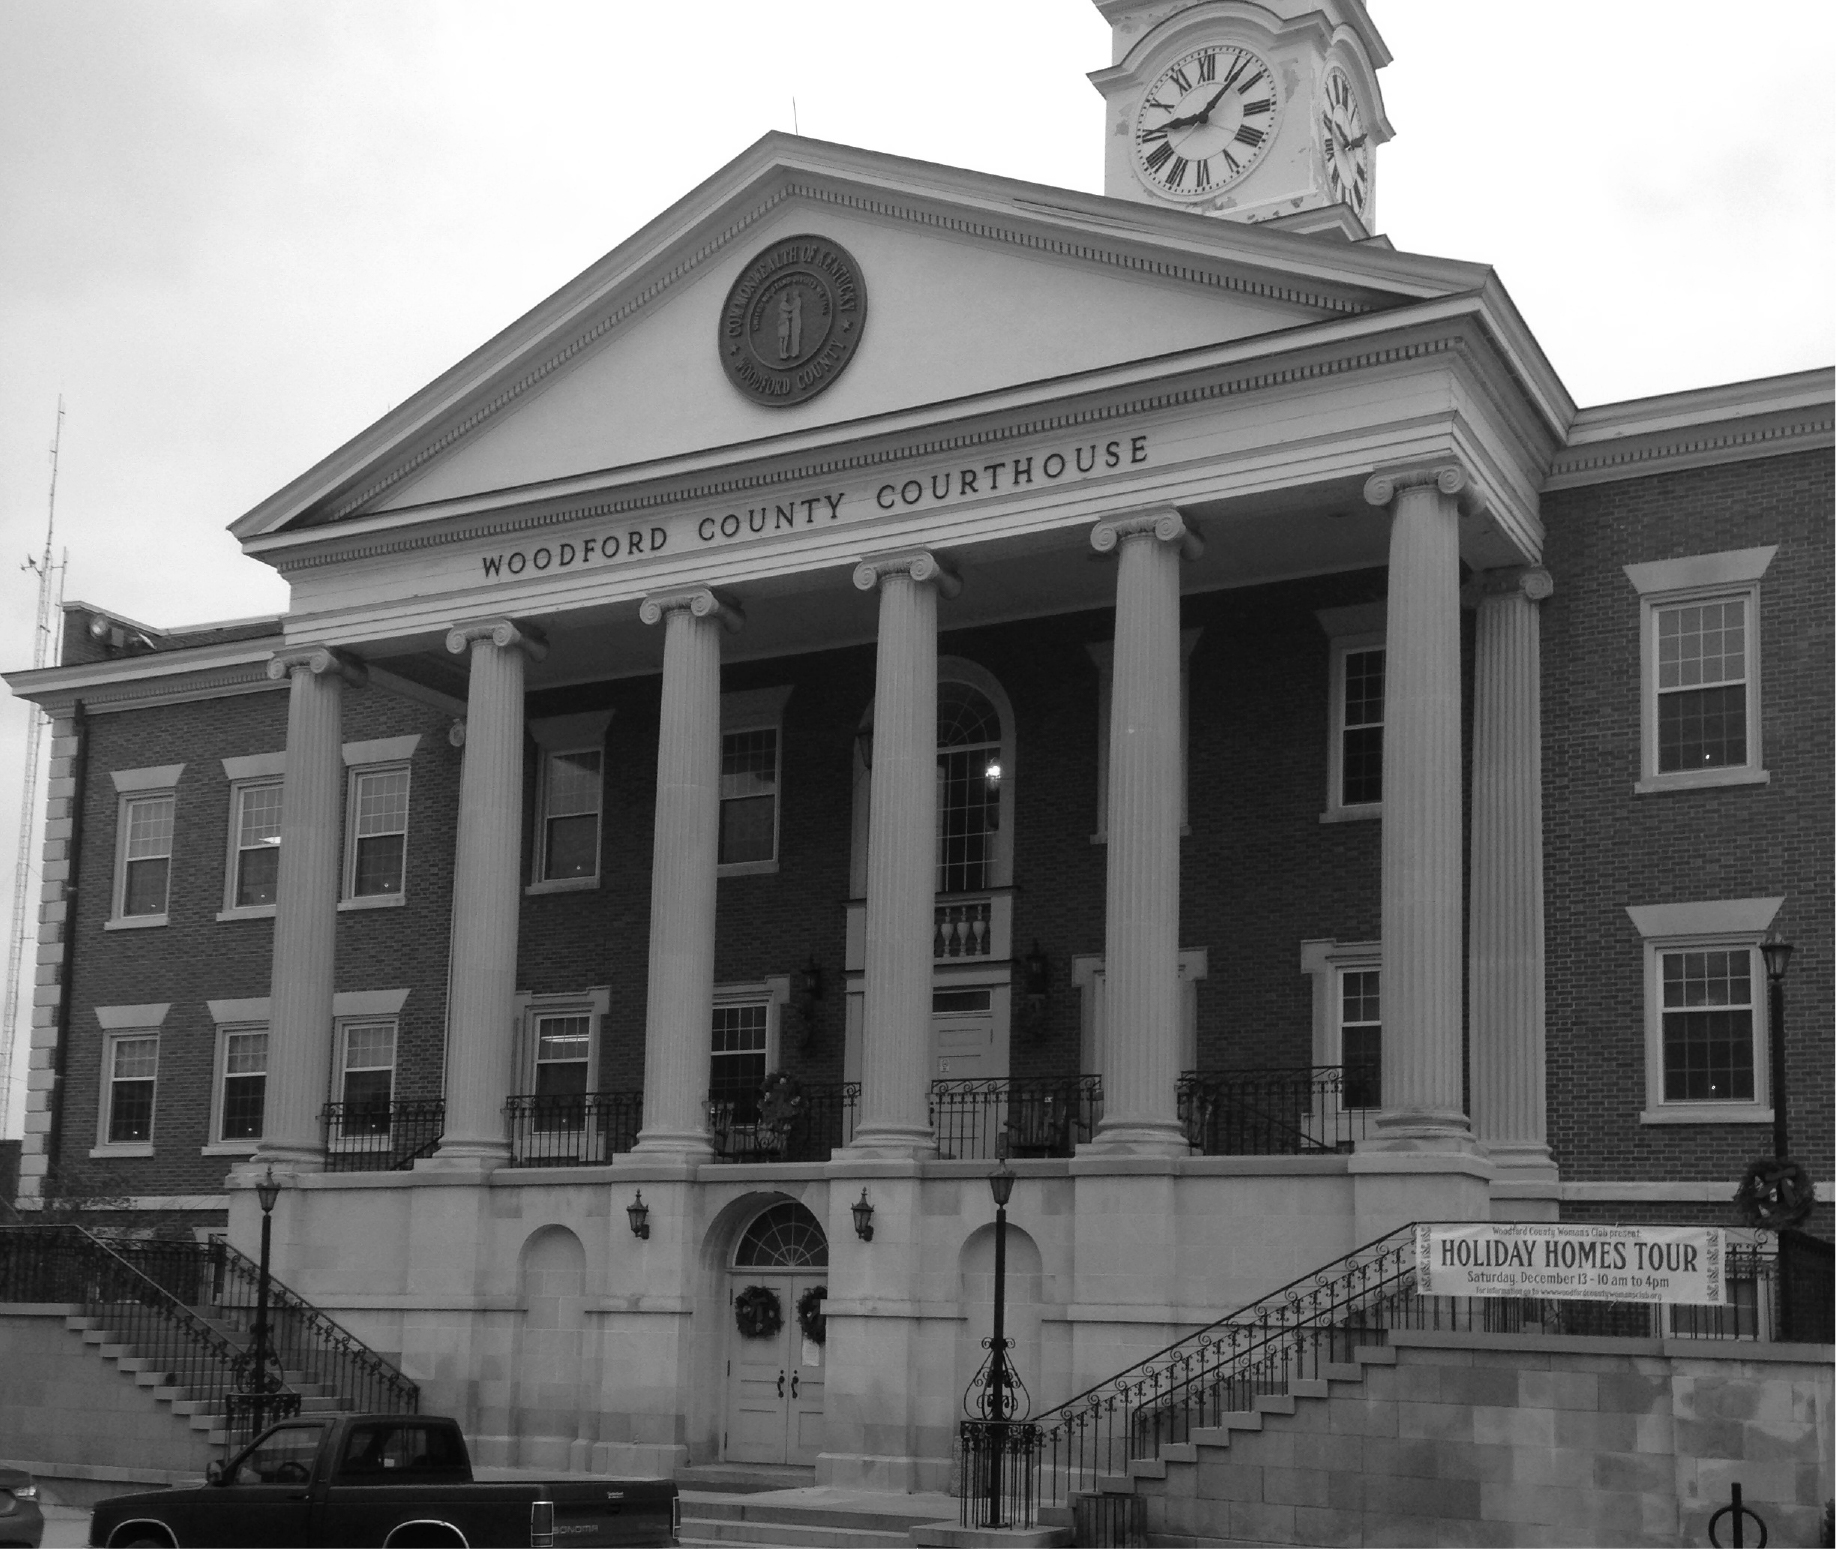 The Woodford County courthouse located in Versailles, Kentucky.